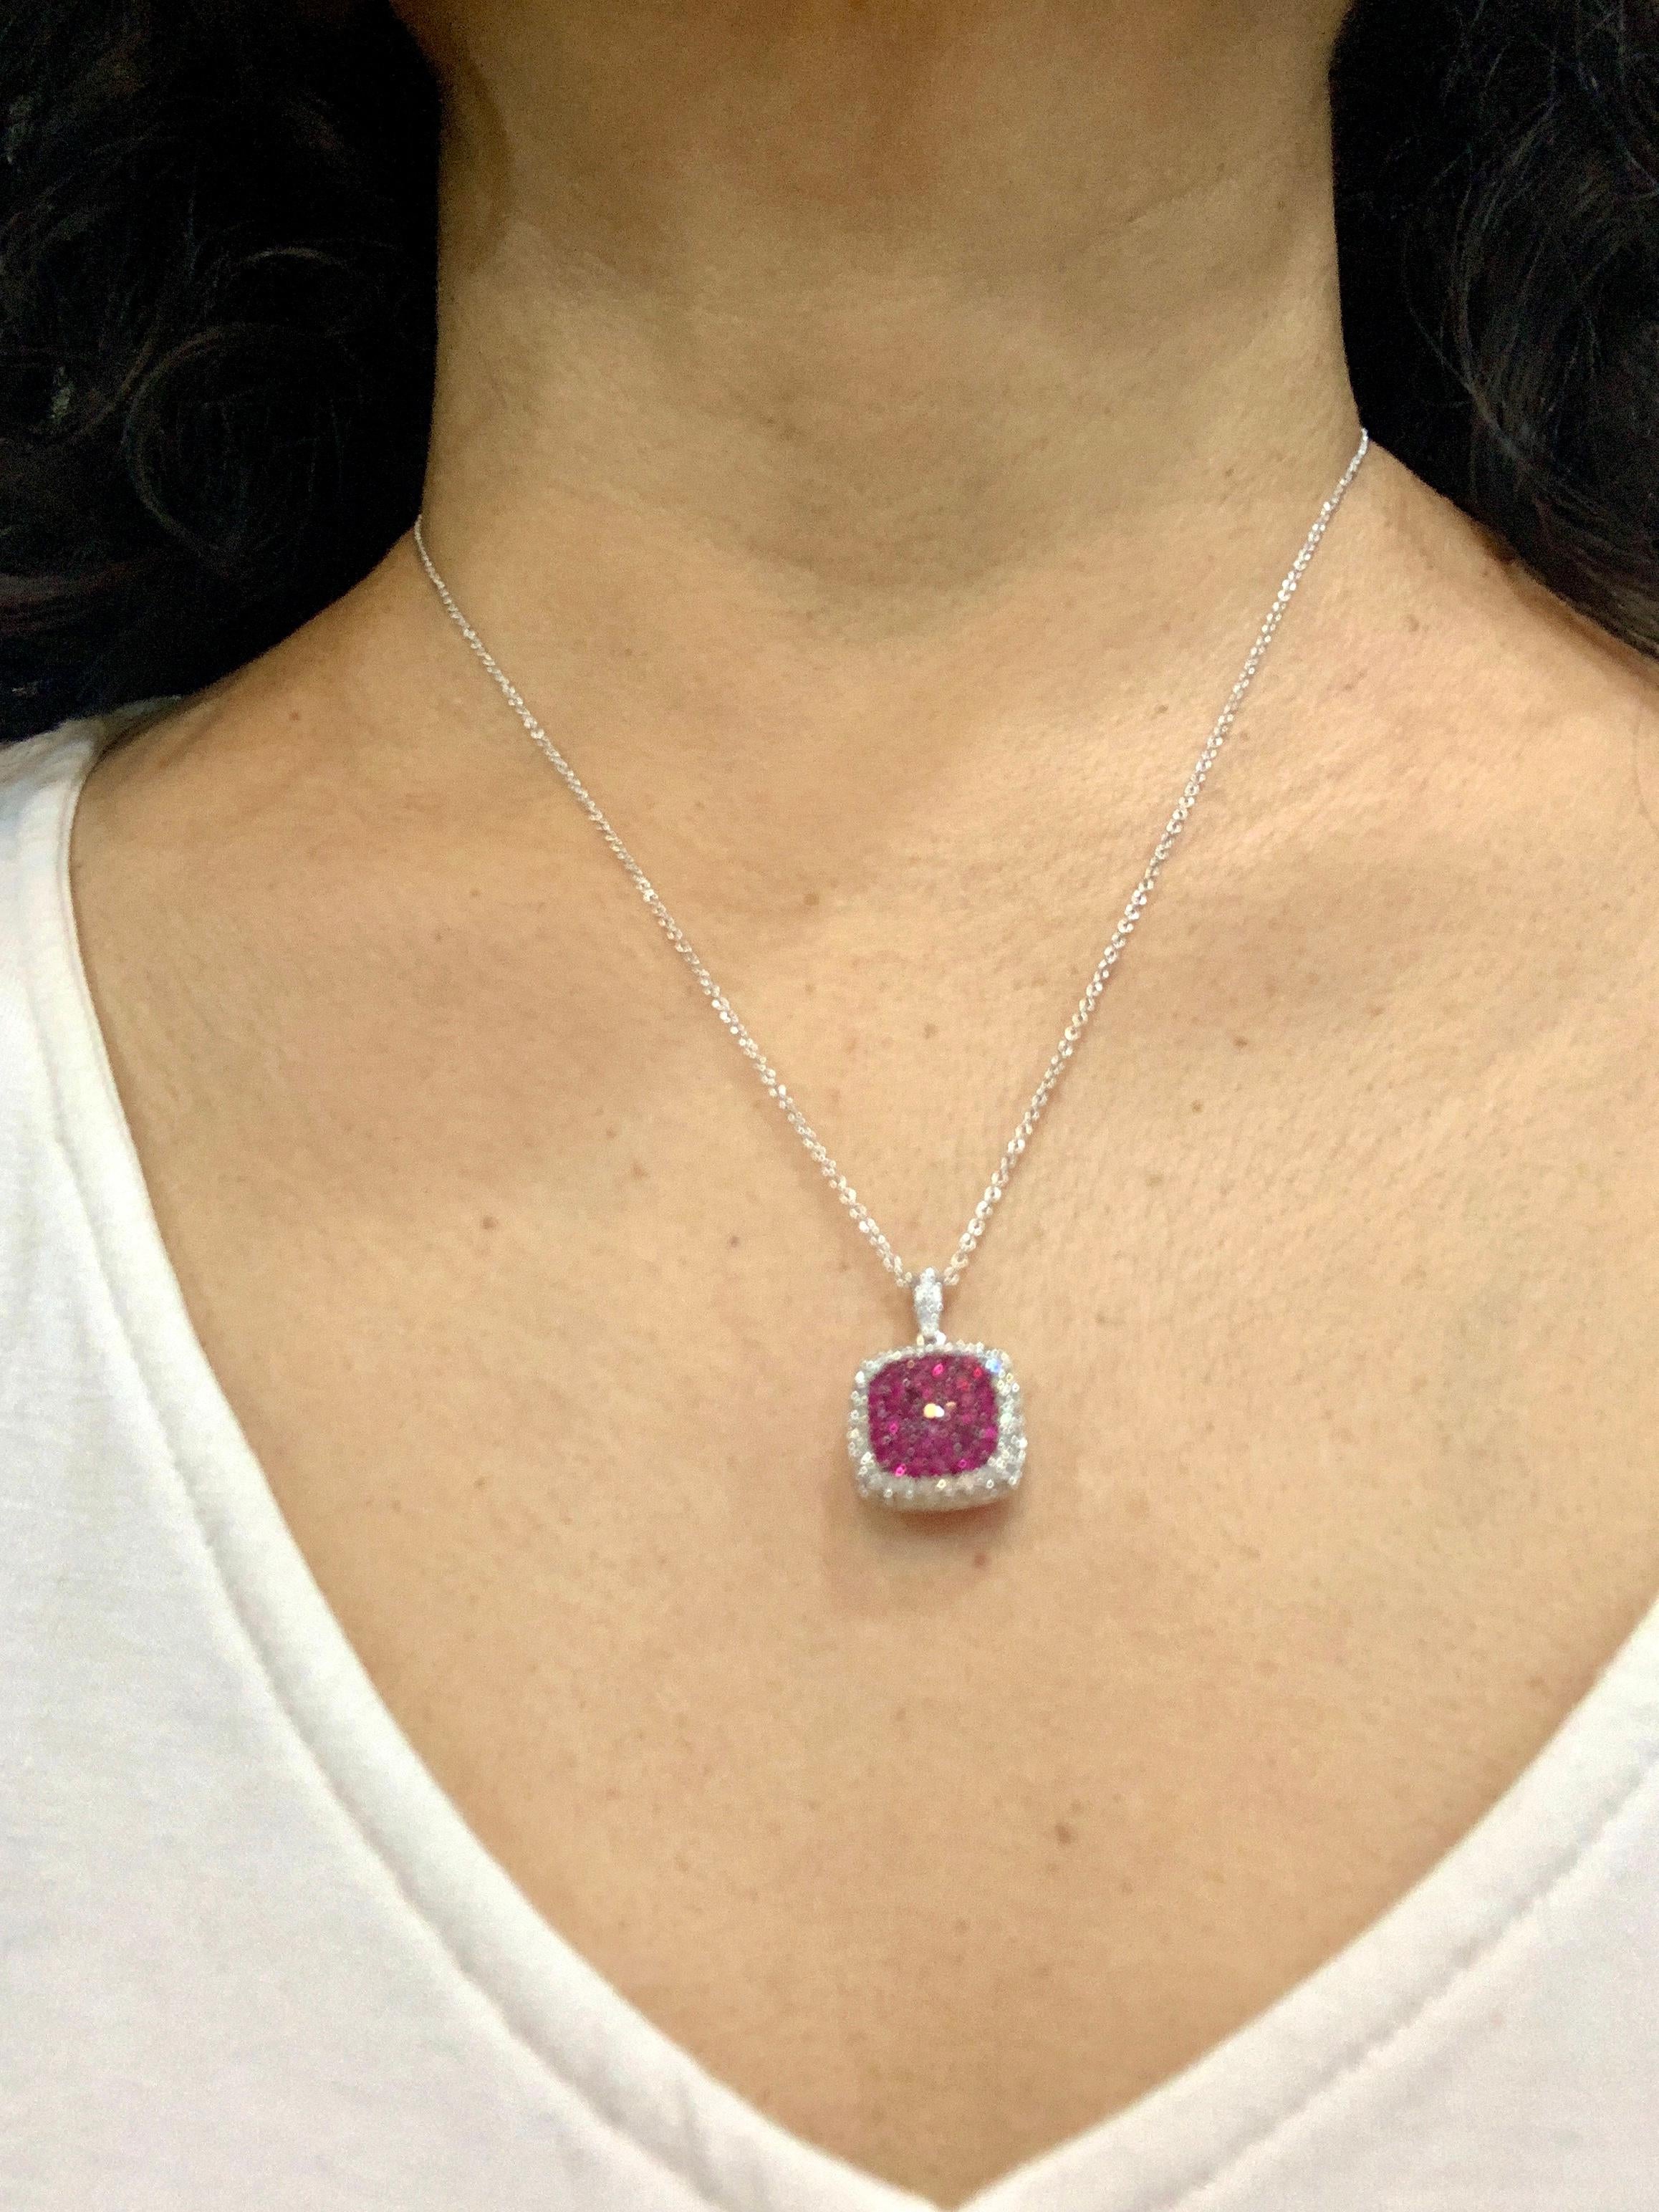 Designer Effy's Natural Ruby and Diamond Pendant /Necklace 14 Karat Gold + Chain In New Condition For Sale In New York, NY